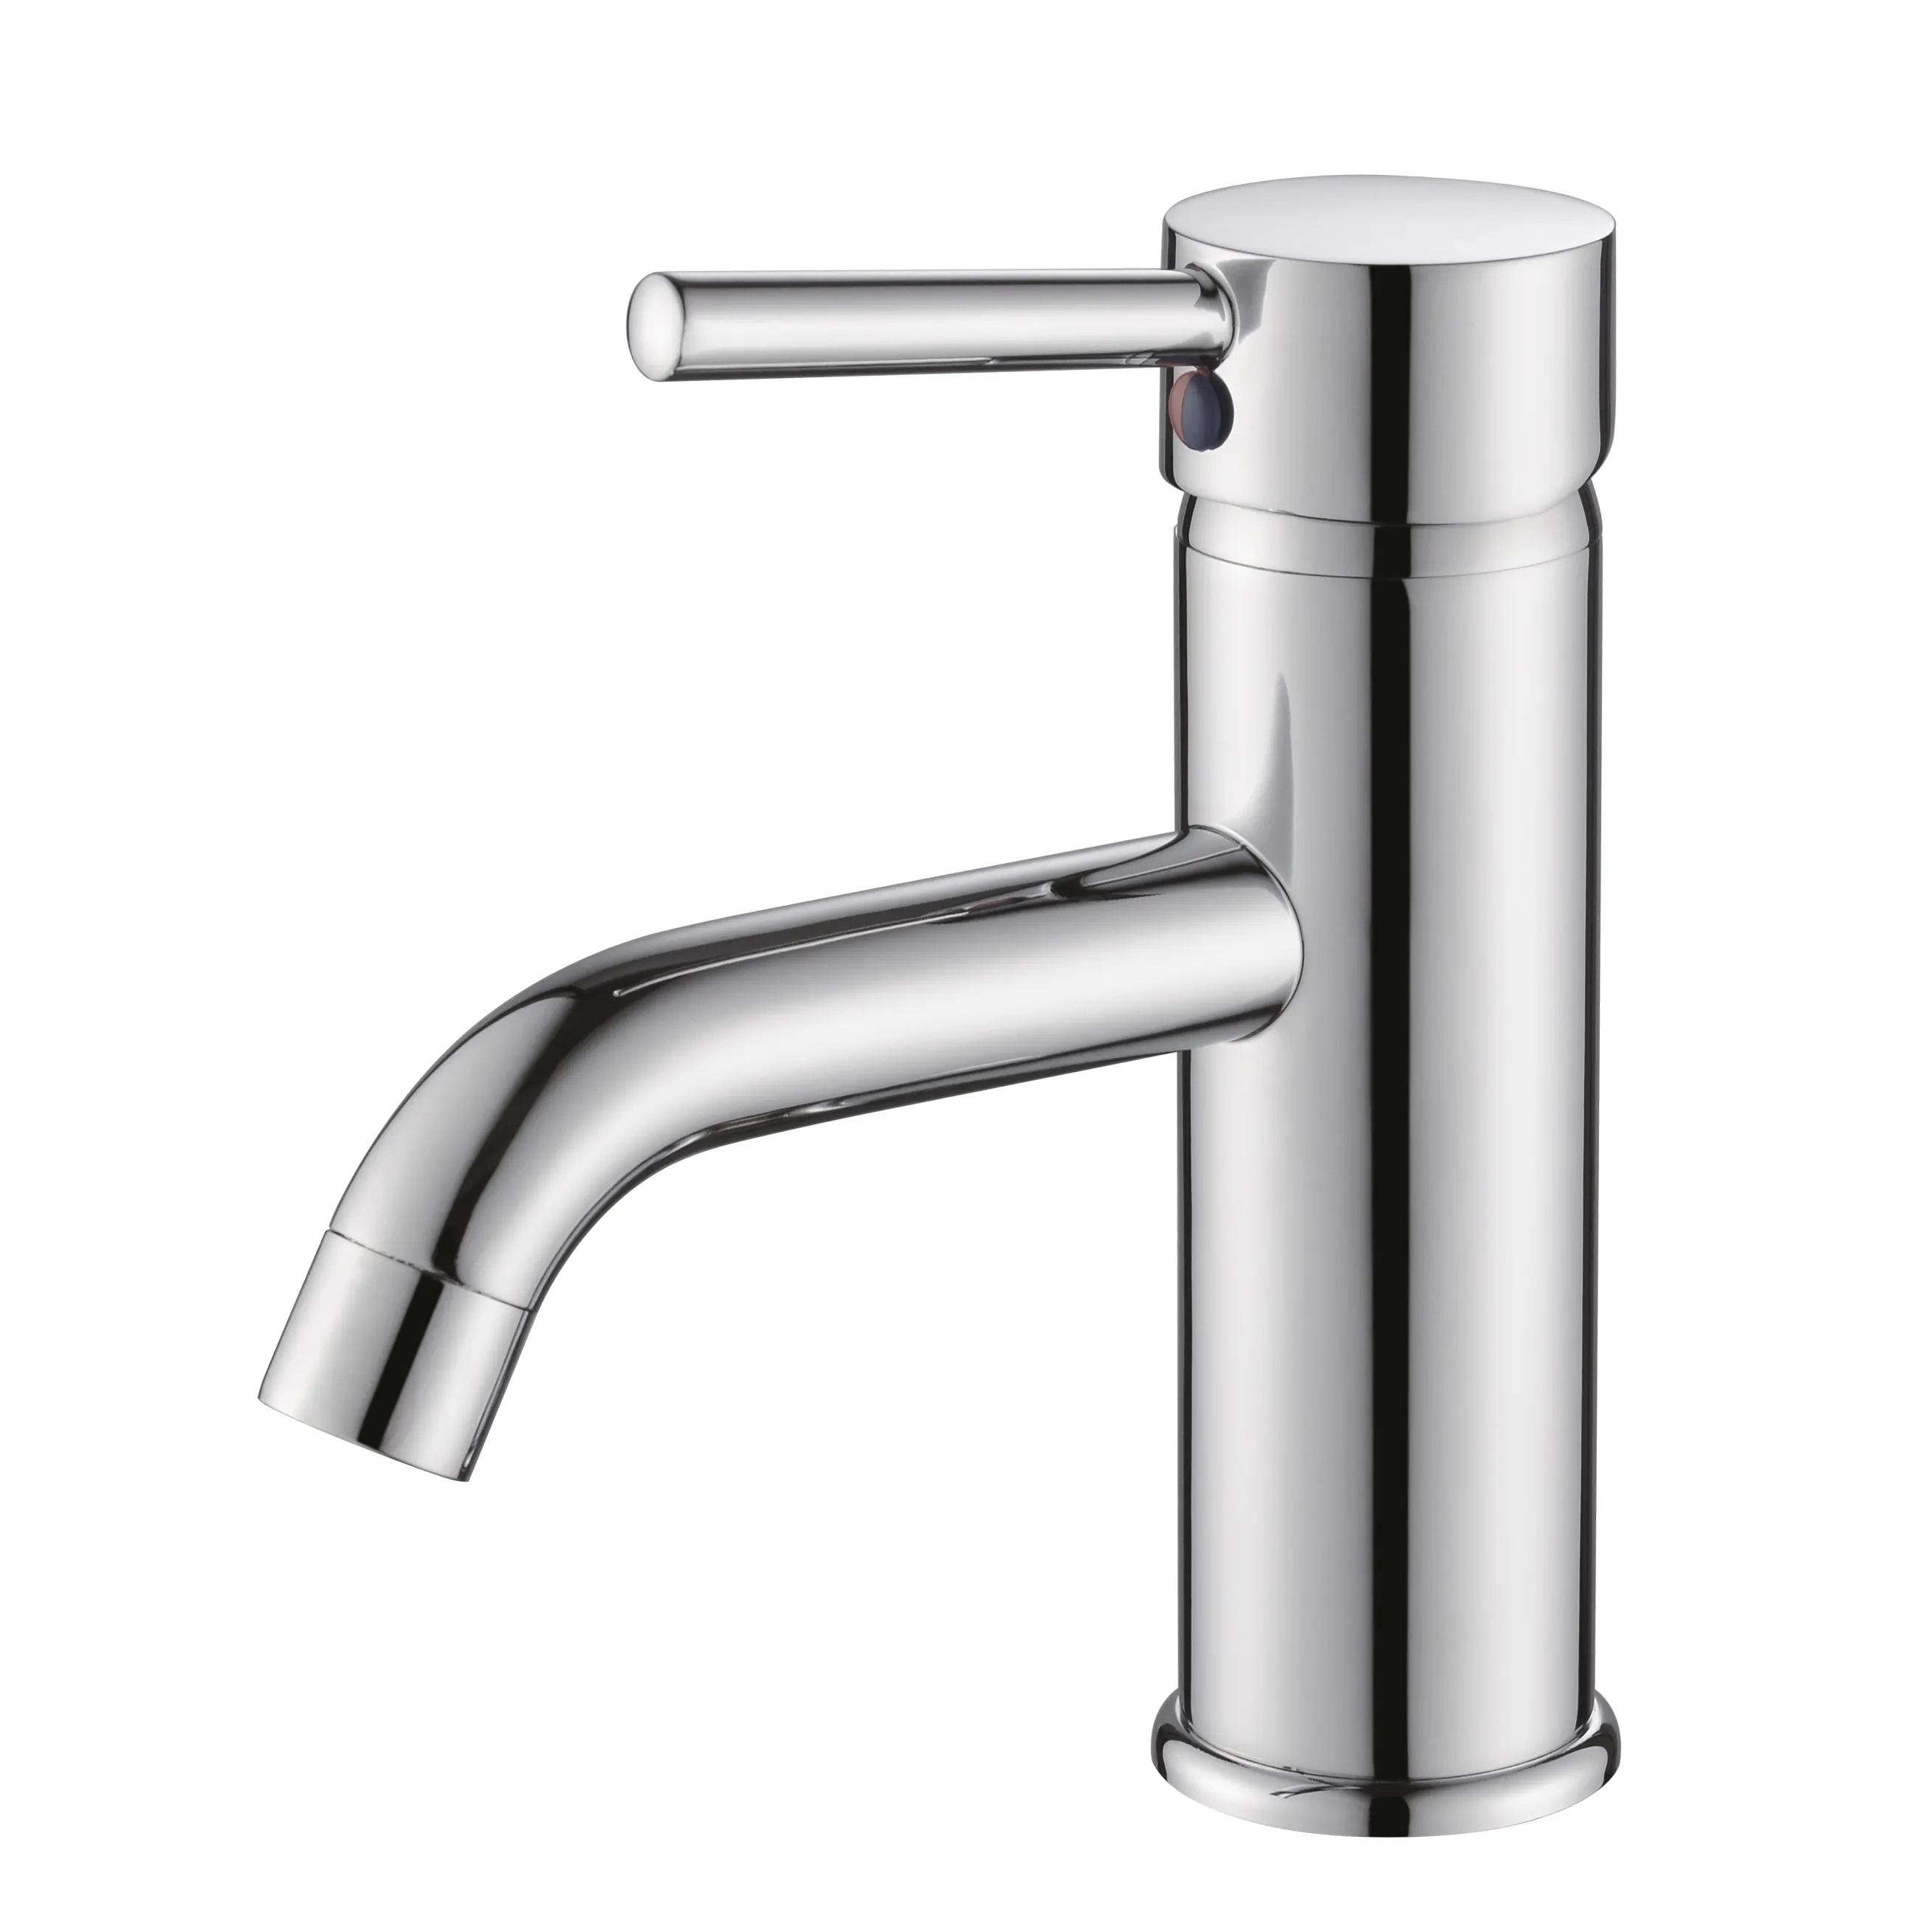 Aquacubic Deck Mounted Mixer Taps SUS 304 Lever Tap Single Handle Bathroom Faucet for Washing Basin